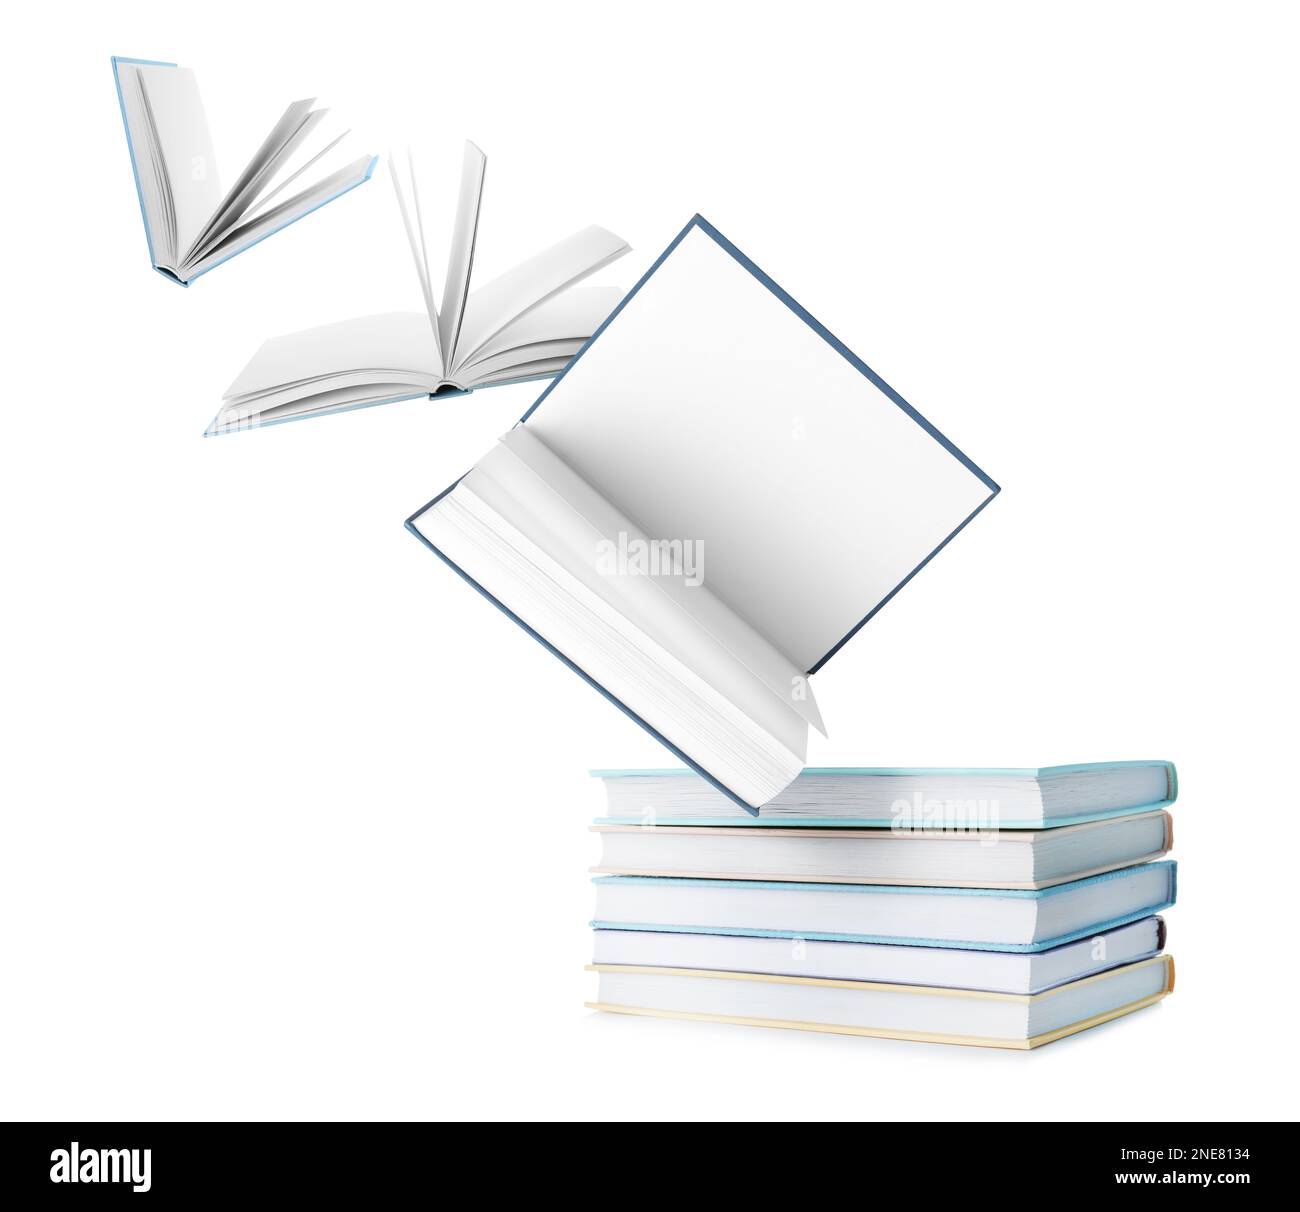 Stacked and flying books on white background, collage Stock Photo